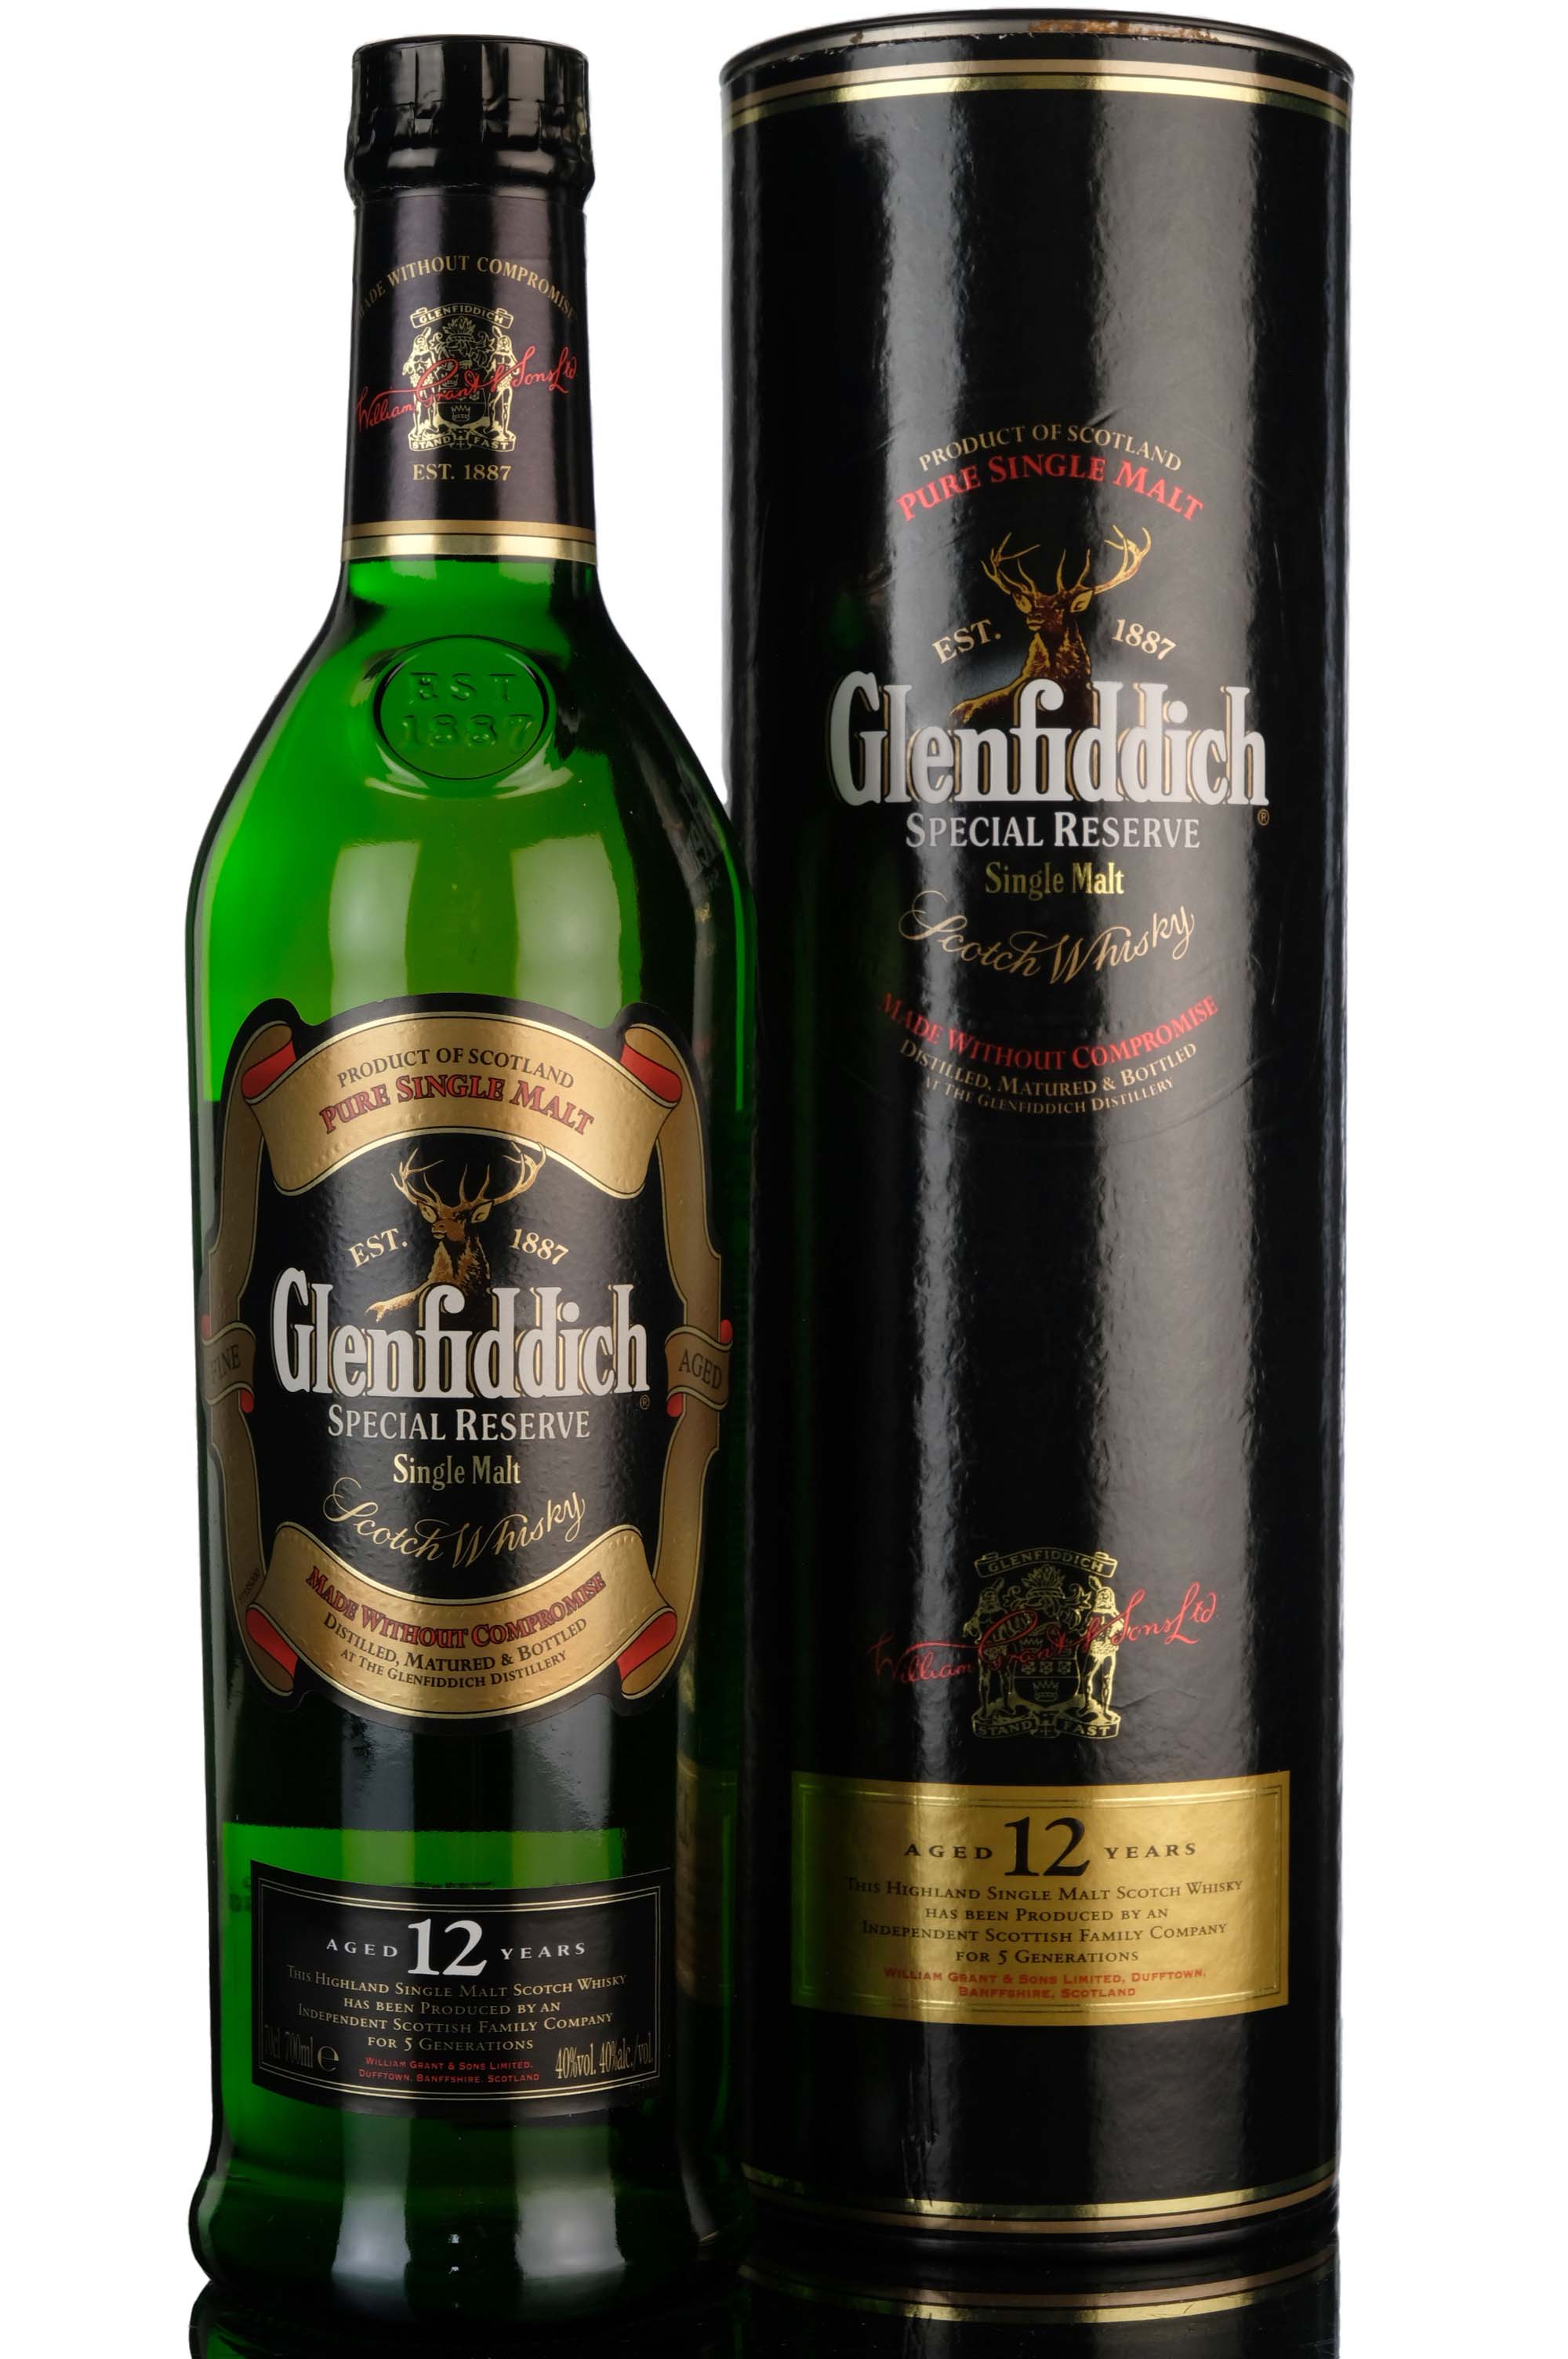 Glenfiddich 12 Year Old - Special Reserve